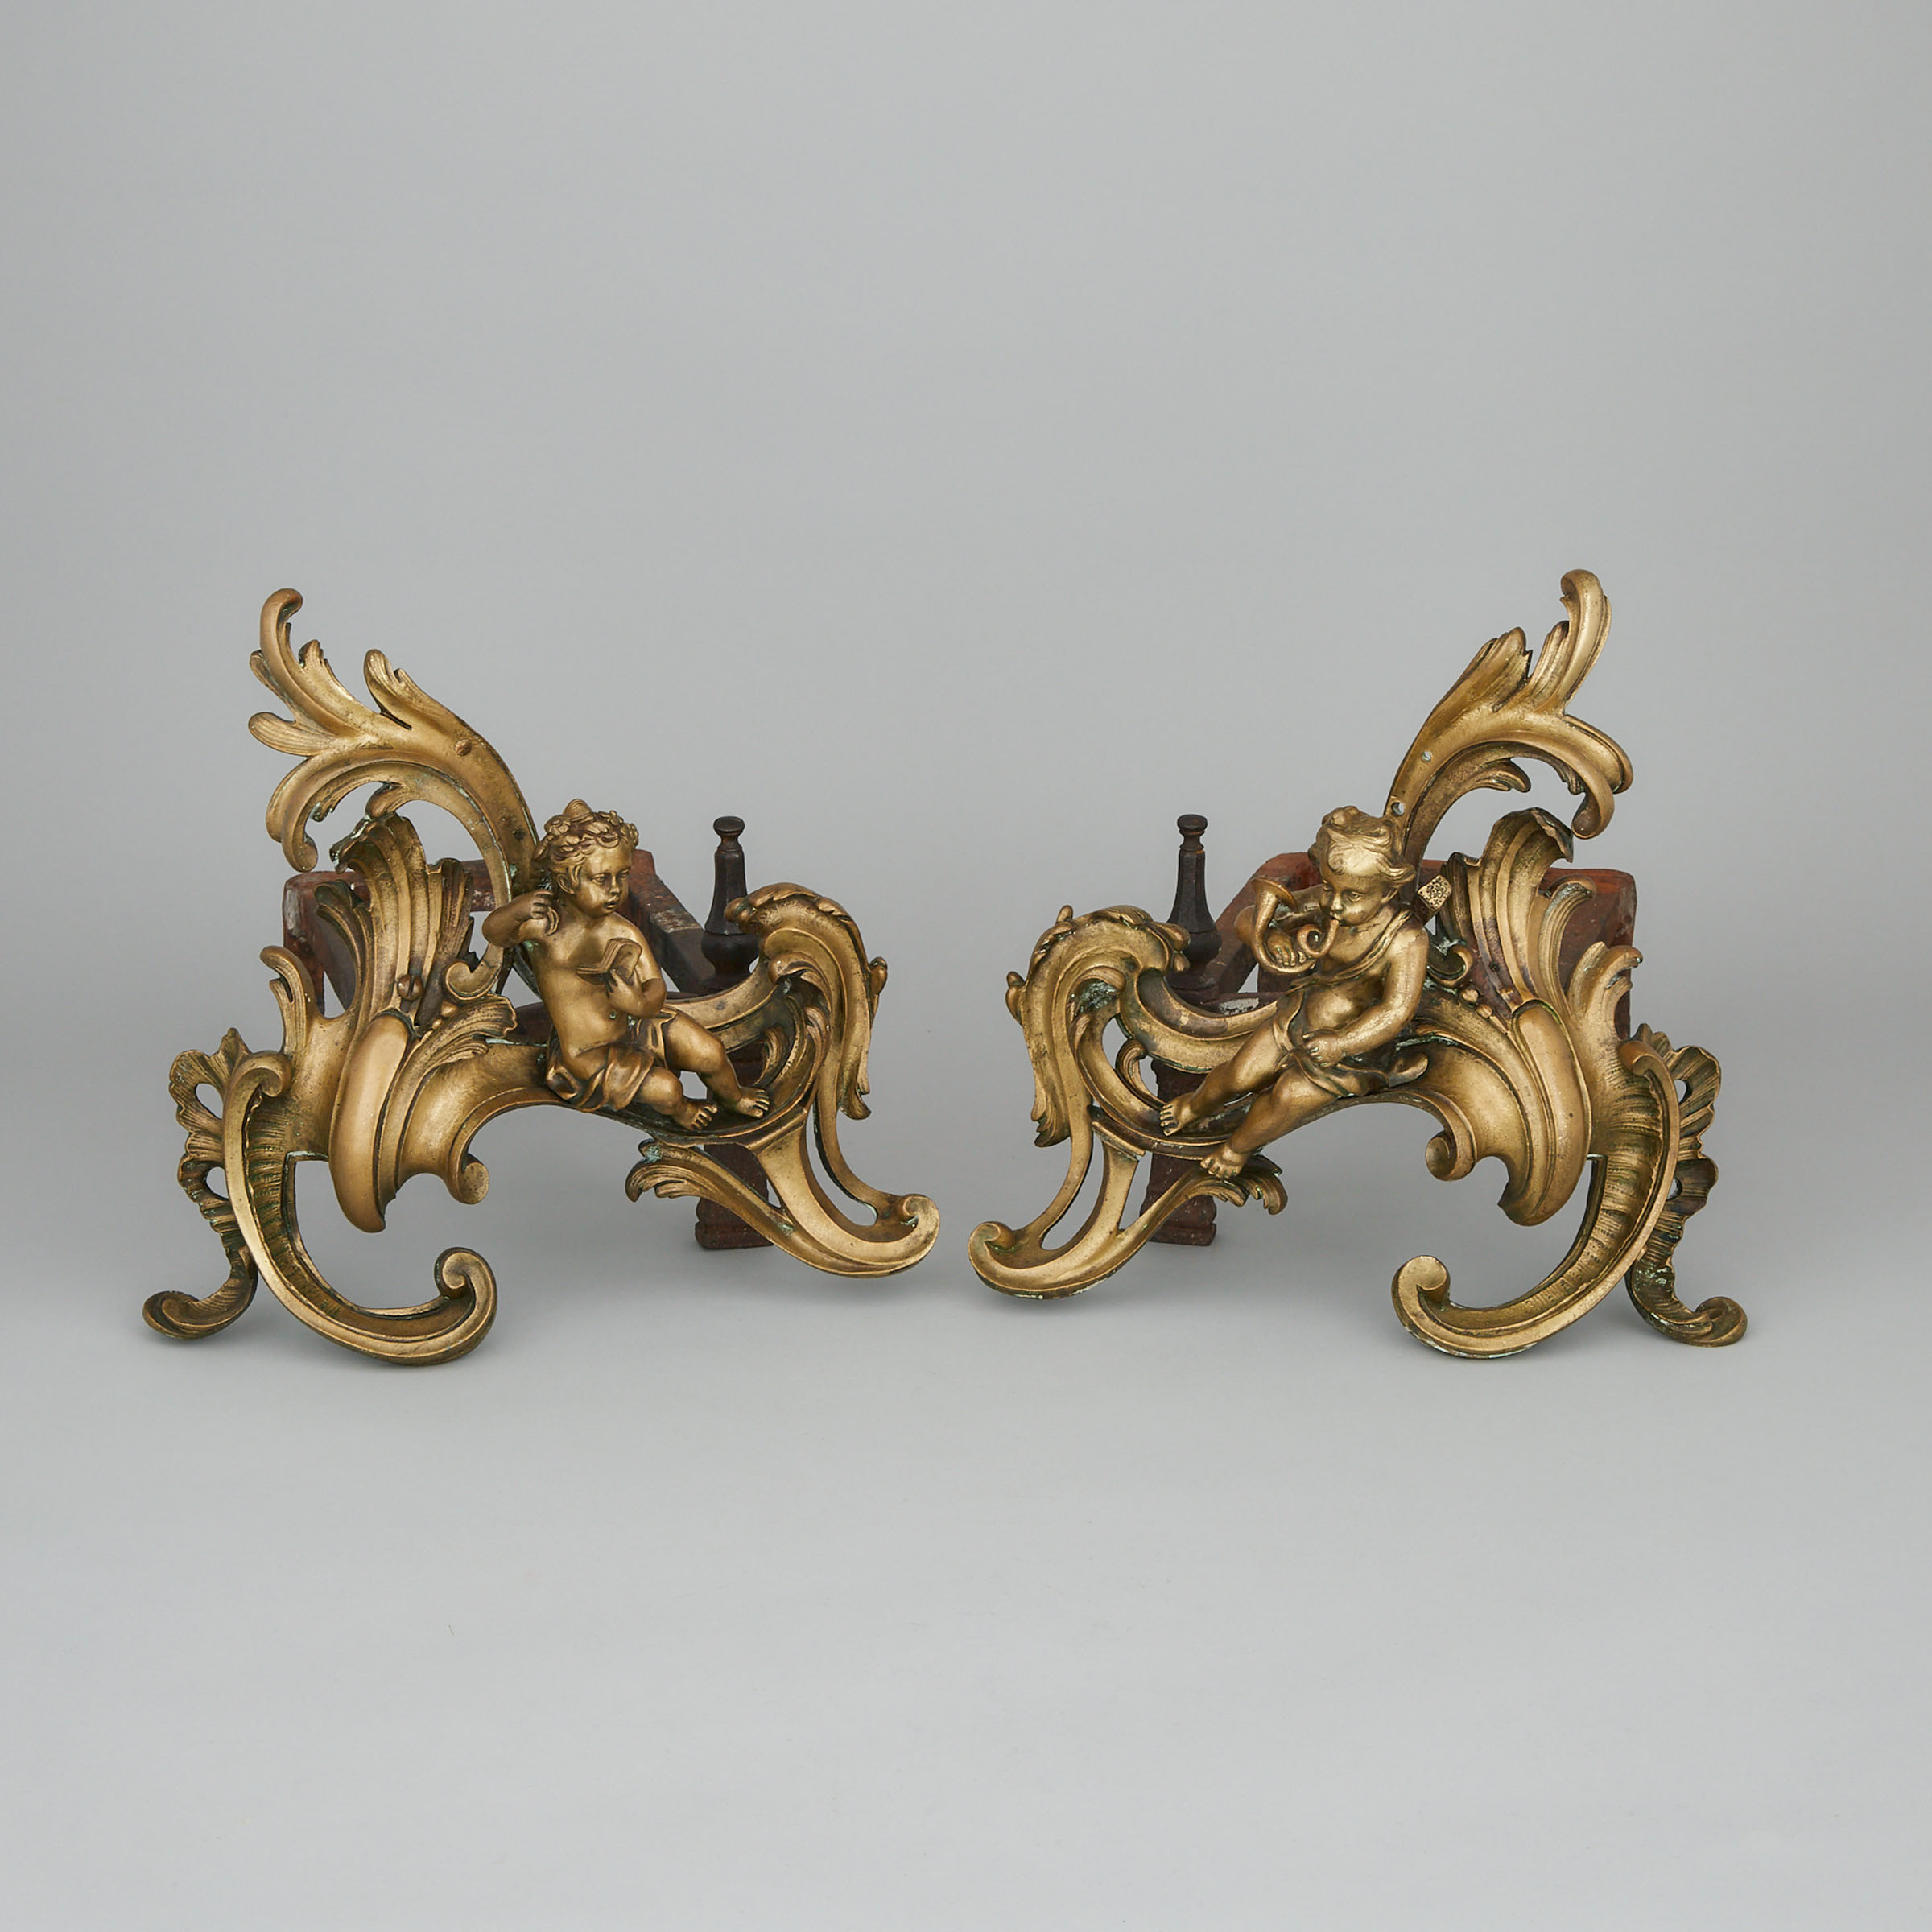 Pair of Louis XV Gilt Bronze Figural Chenets, mid-18th century